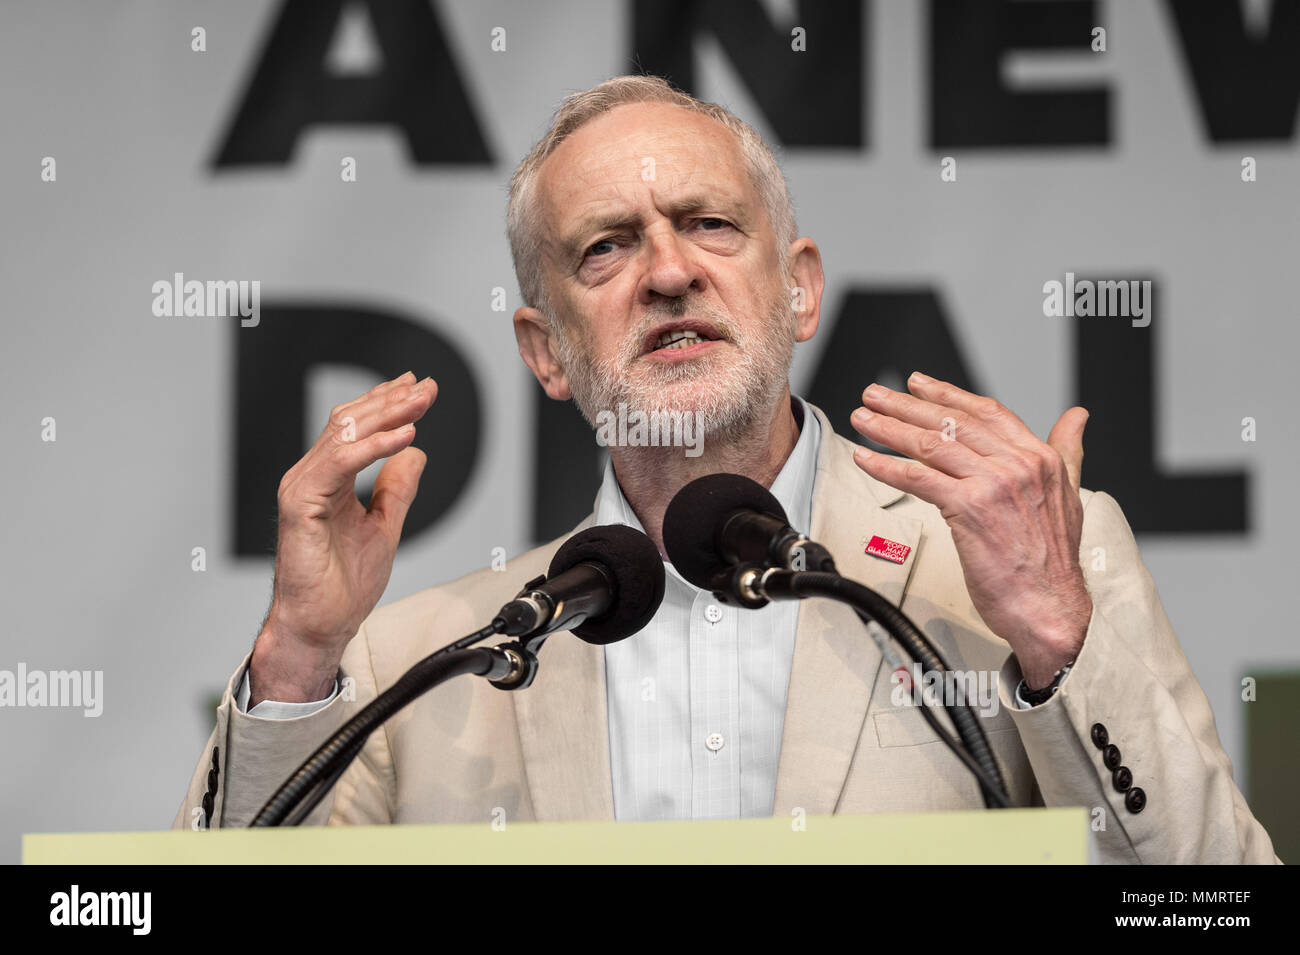 London, UK. 12th May, 2018. Jeremy Corbyn, The Labour Party leader, speaks to a crowd of  thousands of trade unionists during a TUC rally in Hyde Park on the theme of ‘a new deal for working people'. Credit: Guy Corbishley/Alamy Live News Stock Photo